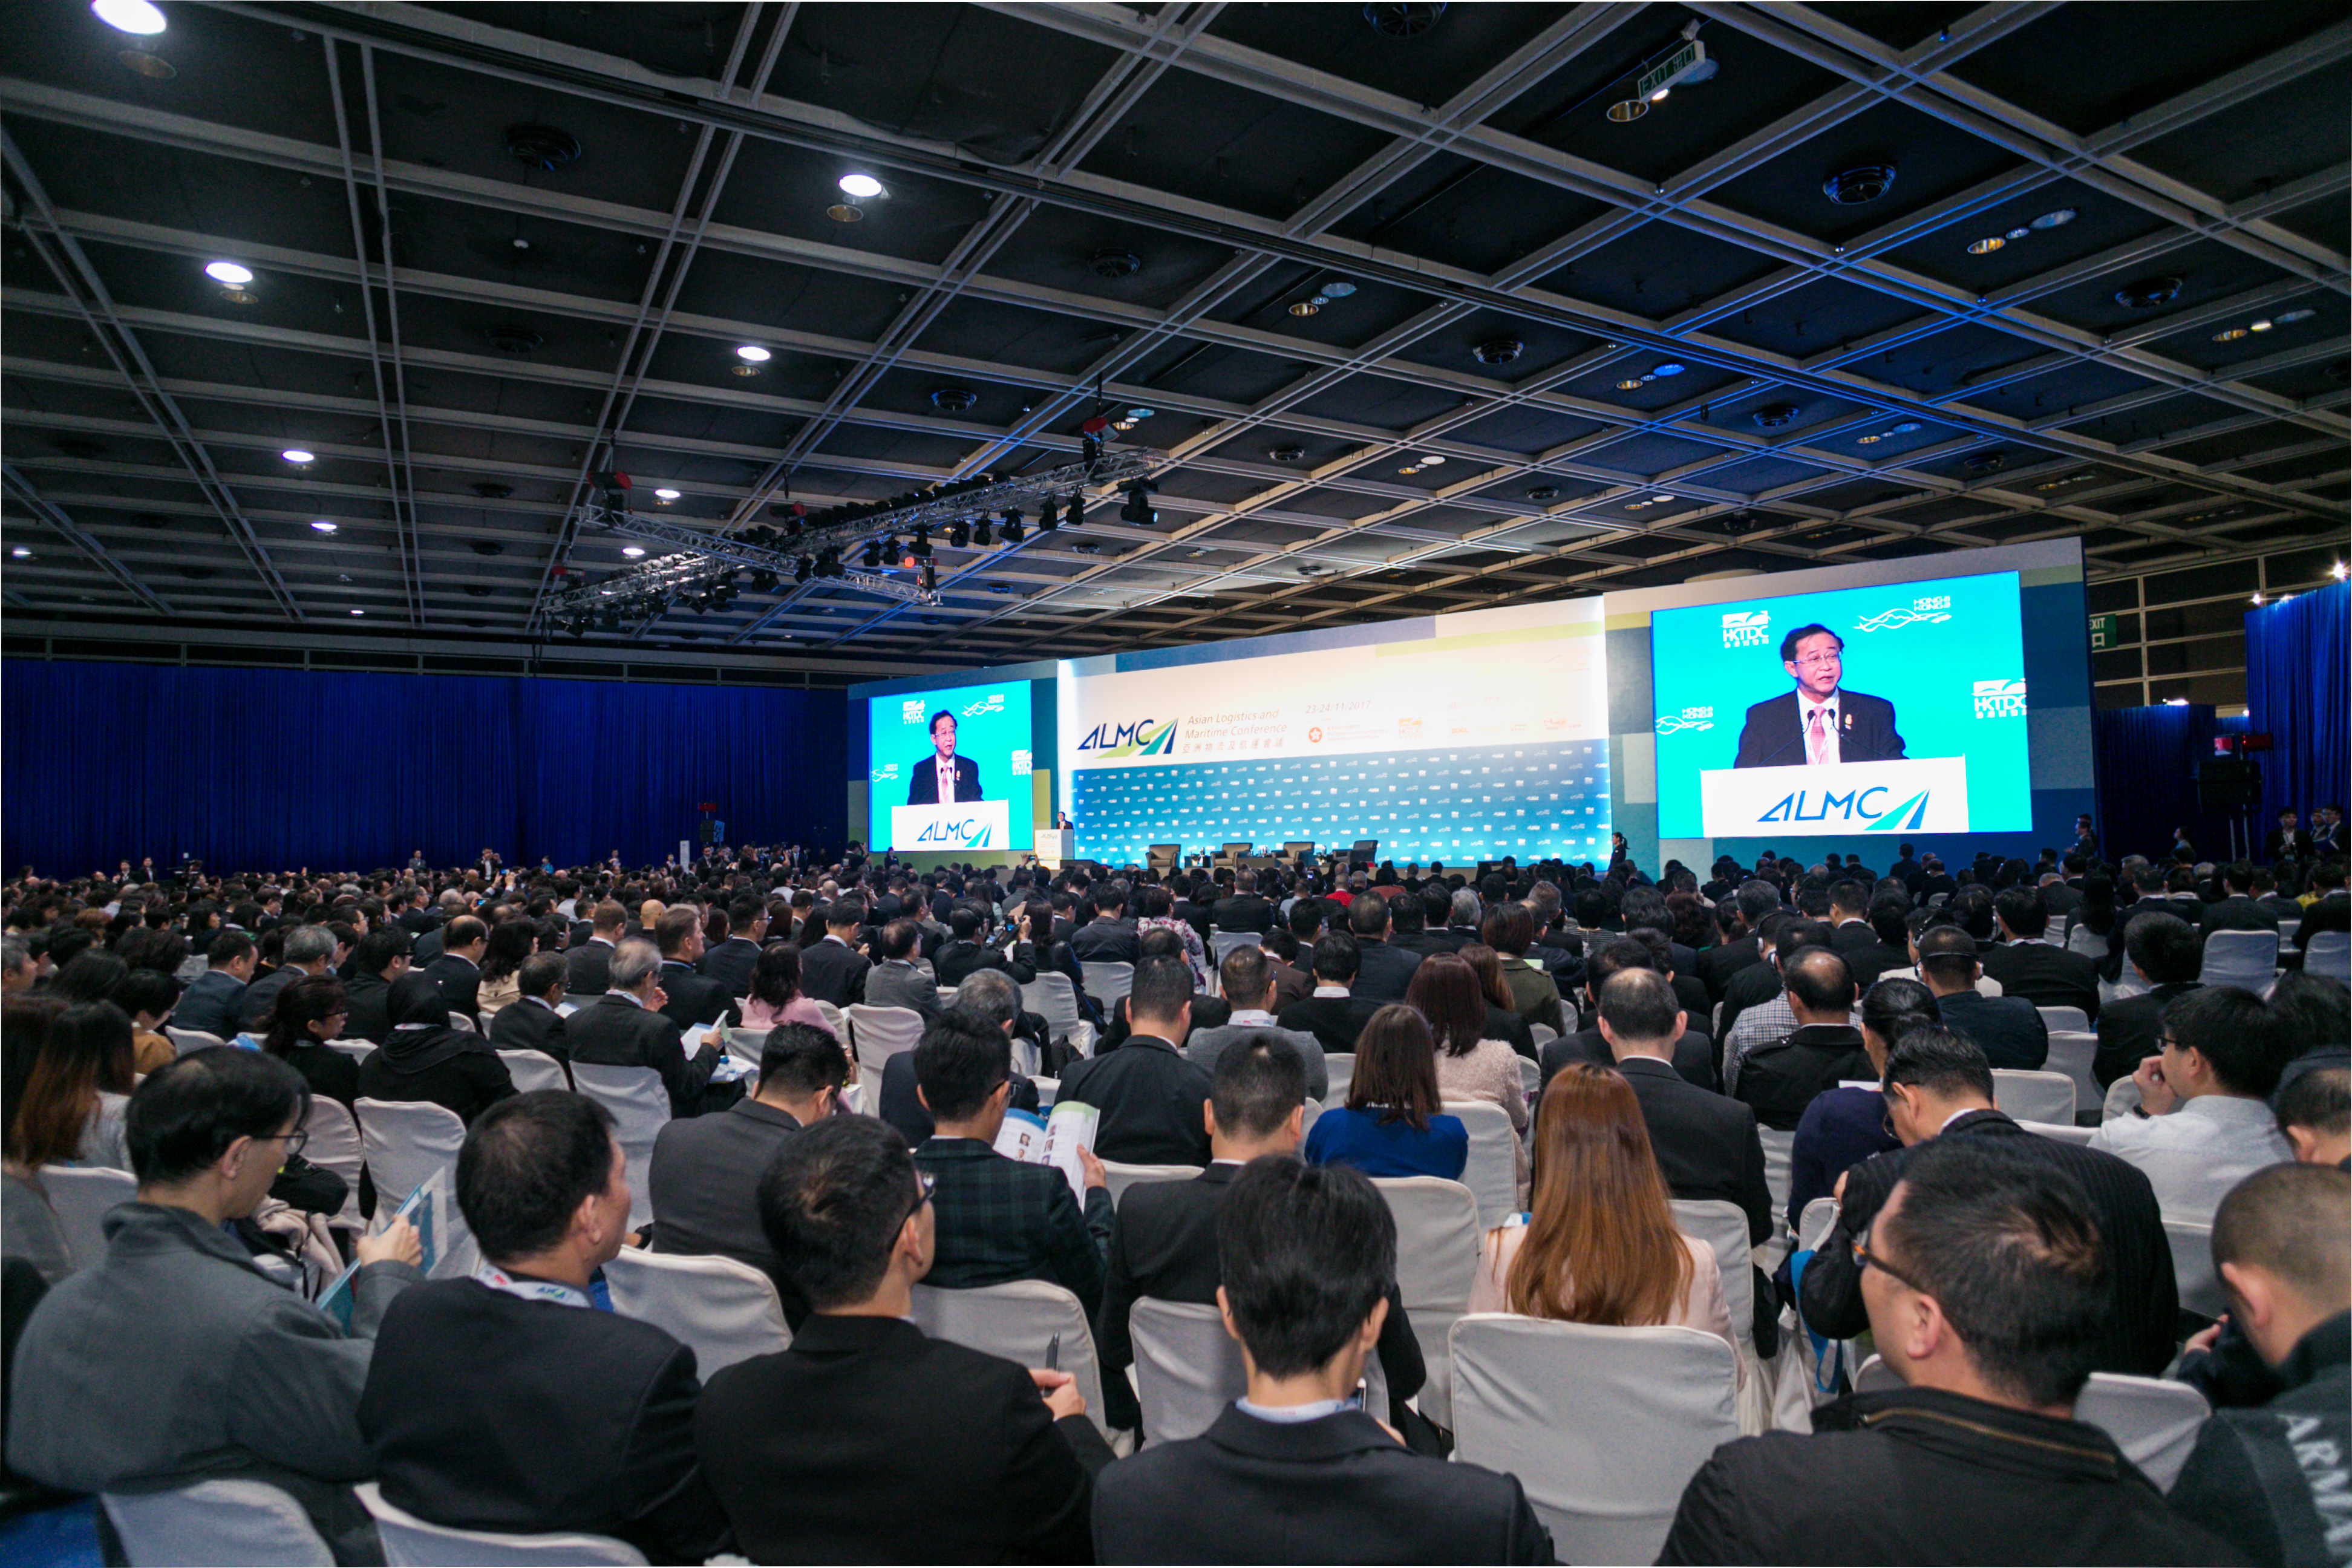 To cater to the needs of the logistics and maritime sectors, the HKTDC invites various industry leaders to attend the annual Asian Logistics and Maritime Conference to examine the latest opportunities